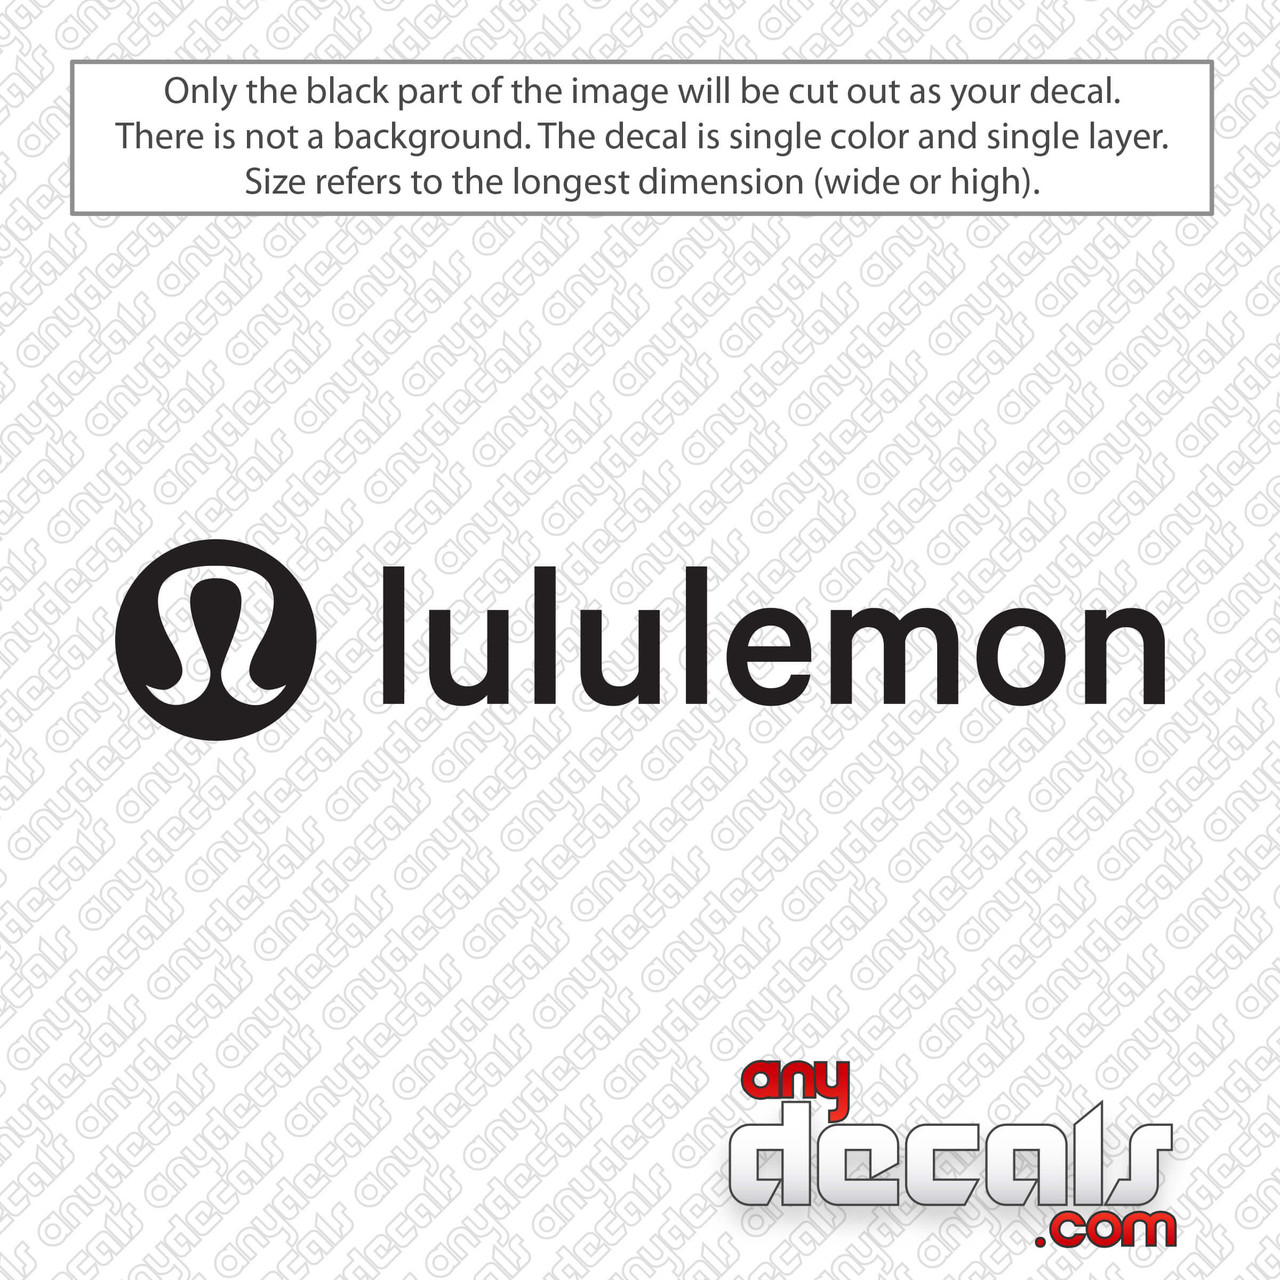 https://cdn11.bigcommerce.com/s-df97c/images/stencil/1280x1280/products/1183/2196/lululemon-logo-with-text-decal-sticker__65695.1598902695.jpg?c=2?imbypass=on